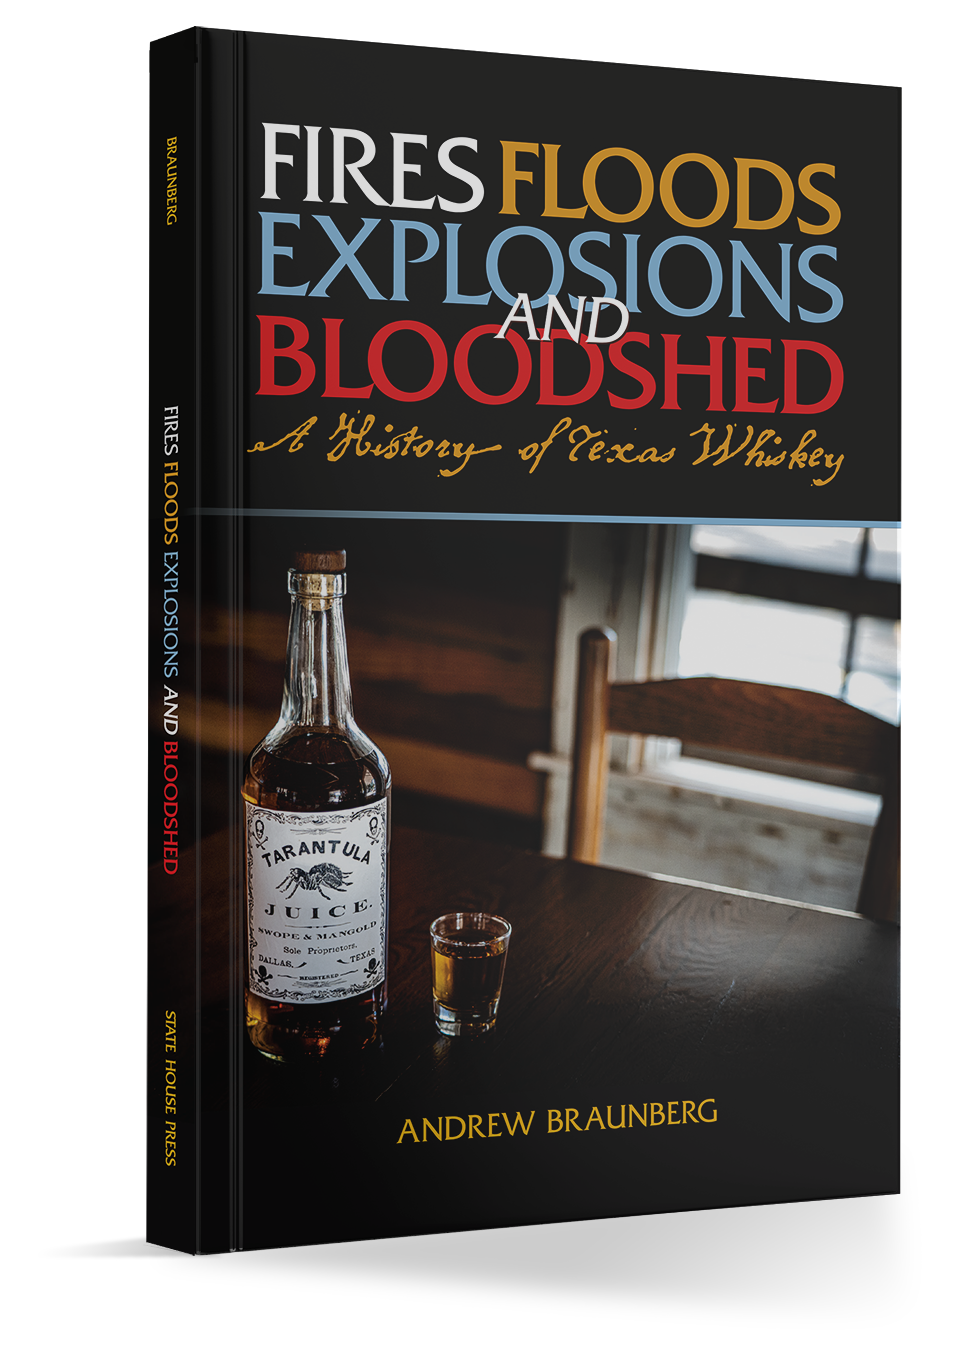 Fire Floods Explosions and Bloodshed Book Cover